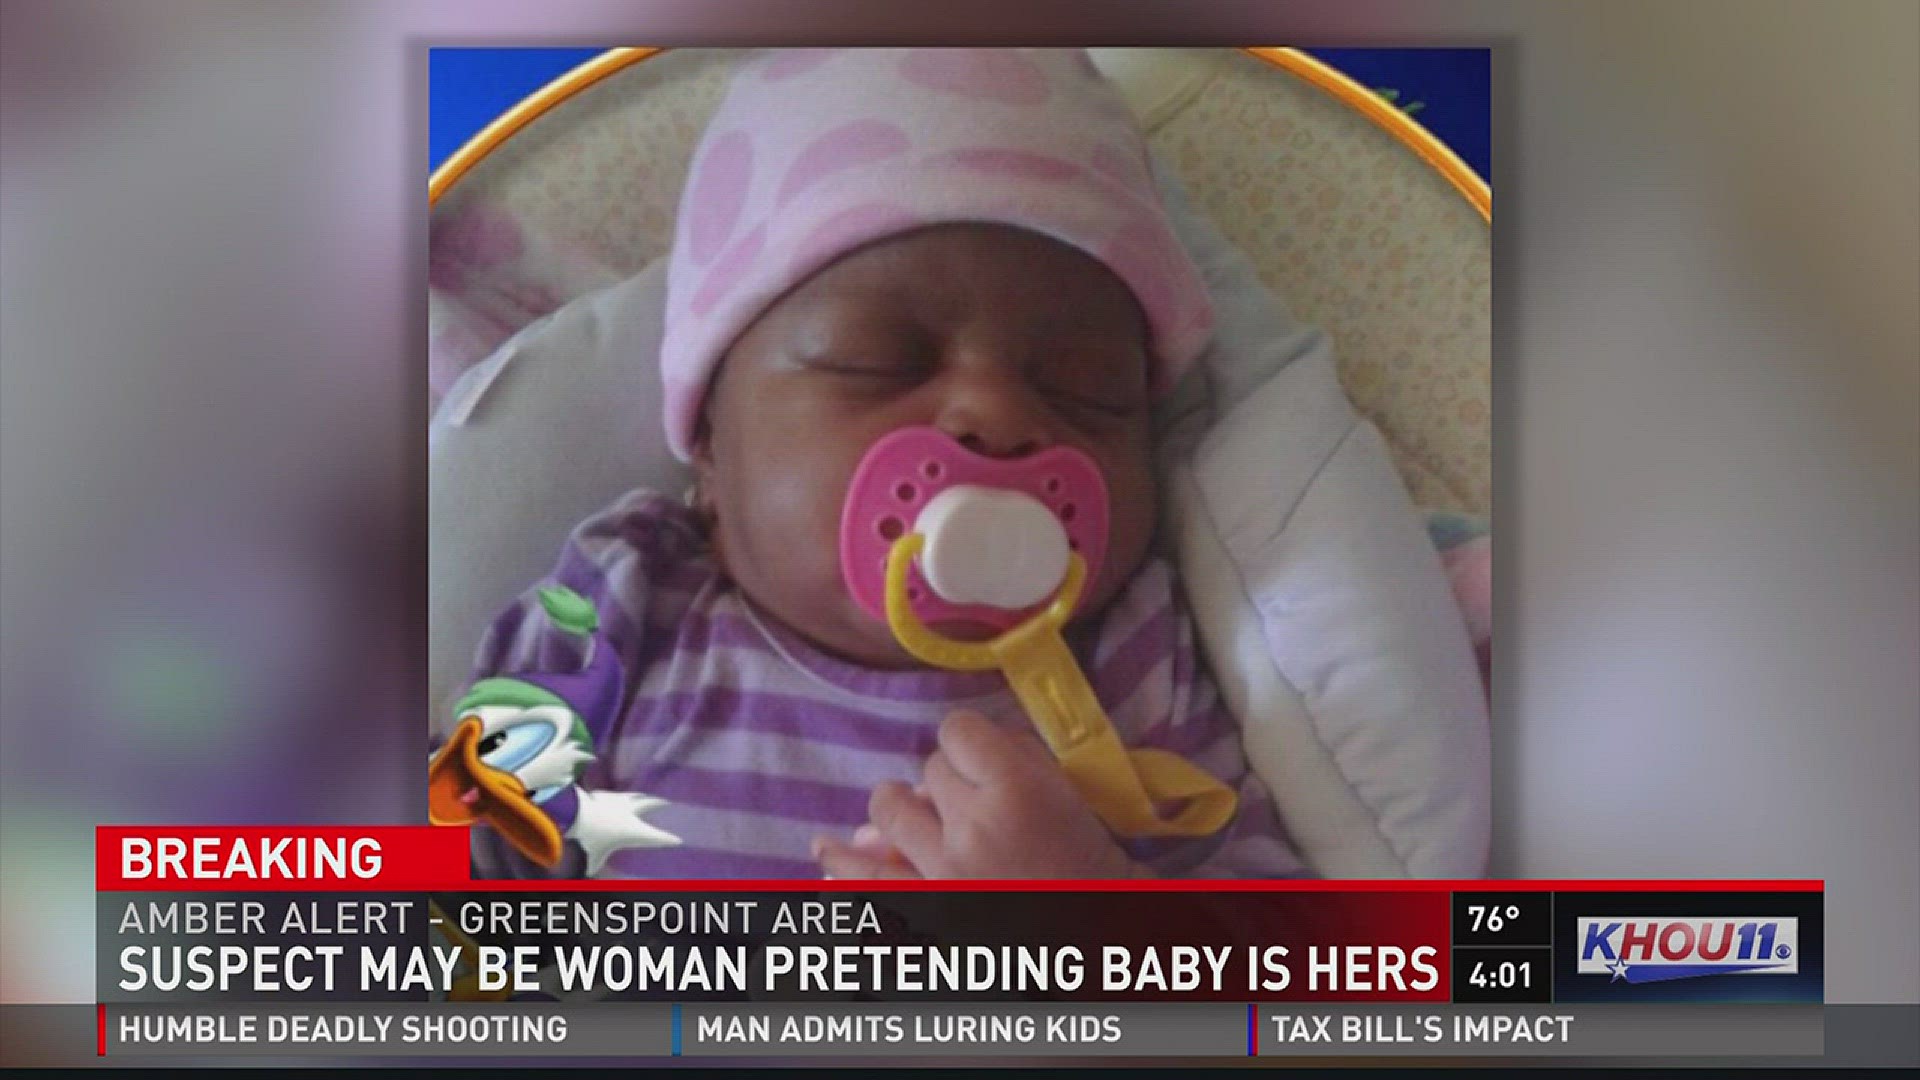 Police are asking for the public's help in finding a 6-week-old baby, who is the subject of an active Amber Alert after her mother was found murdered.